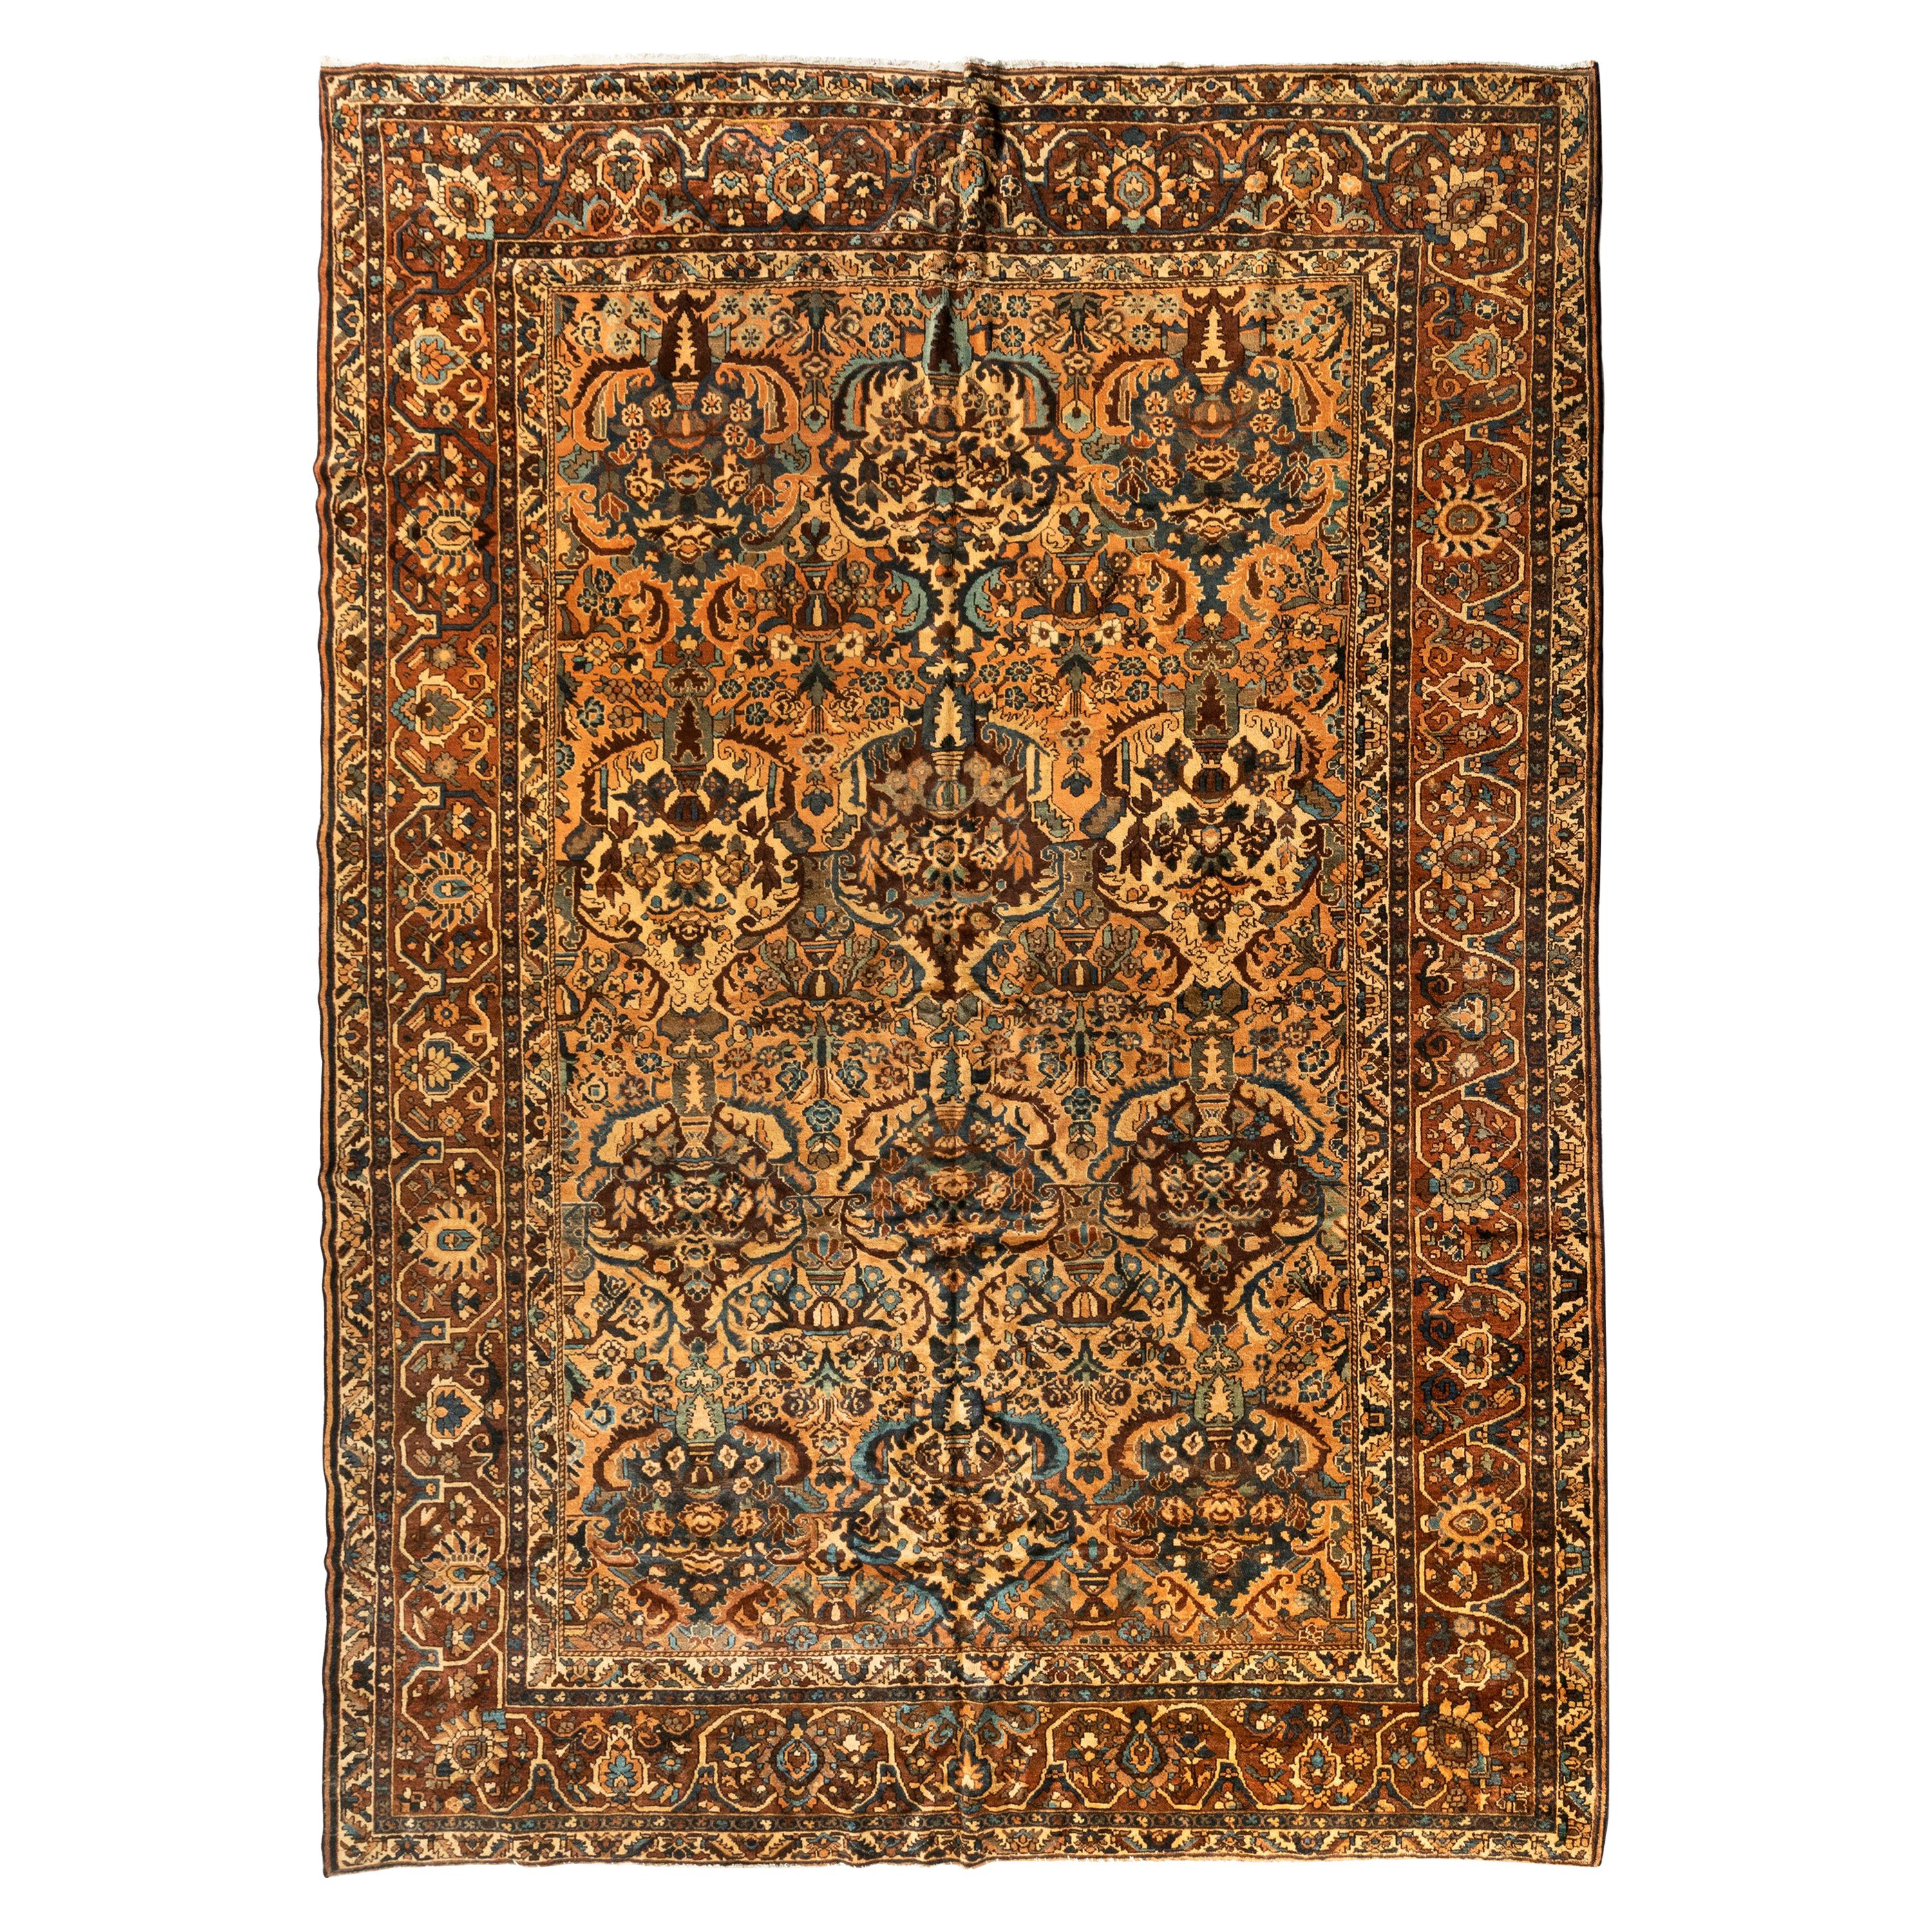 Antique Oversize Large Persian Brown and Ivory Bakhtiari Rug, circa 1930s-1940s For Sale